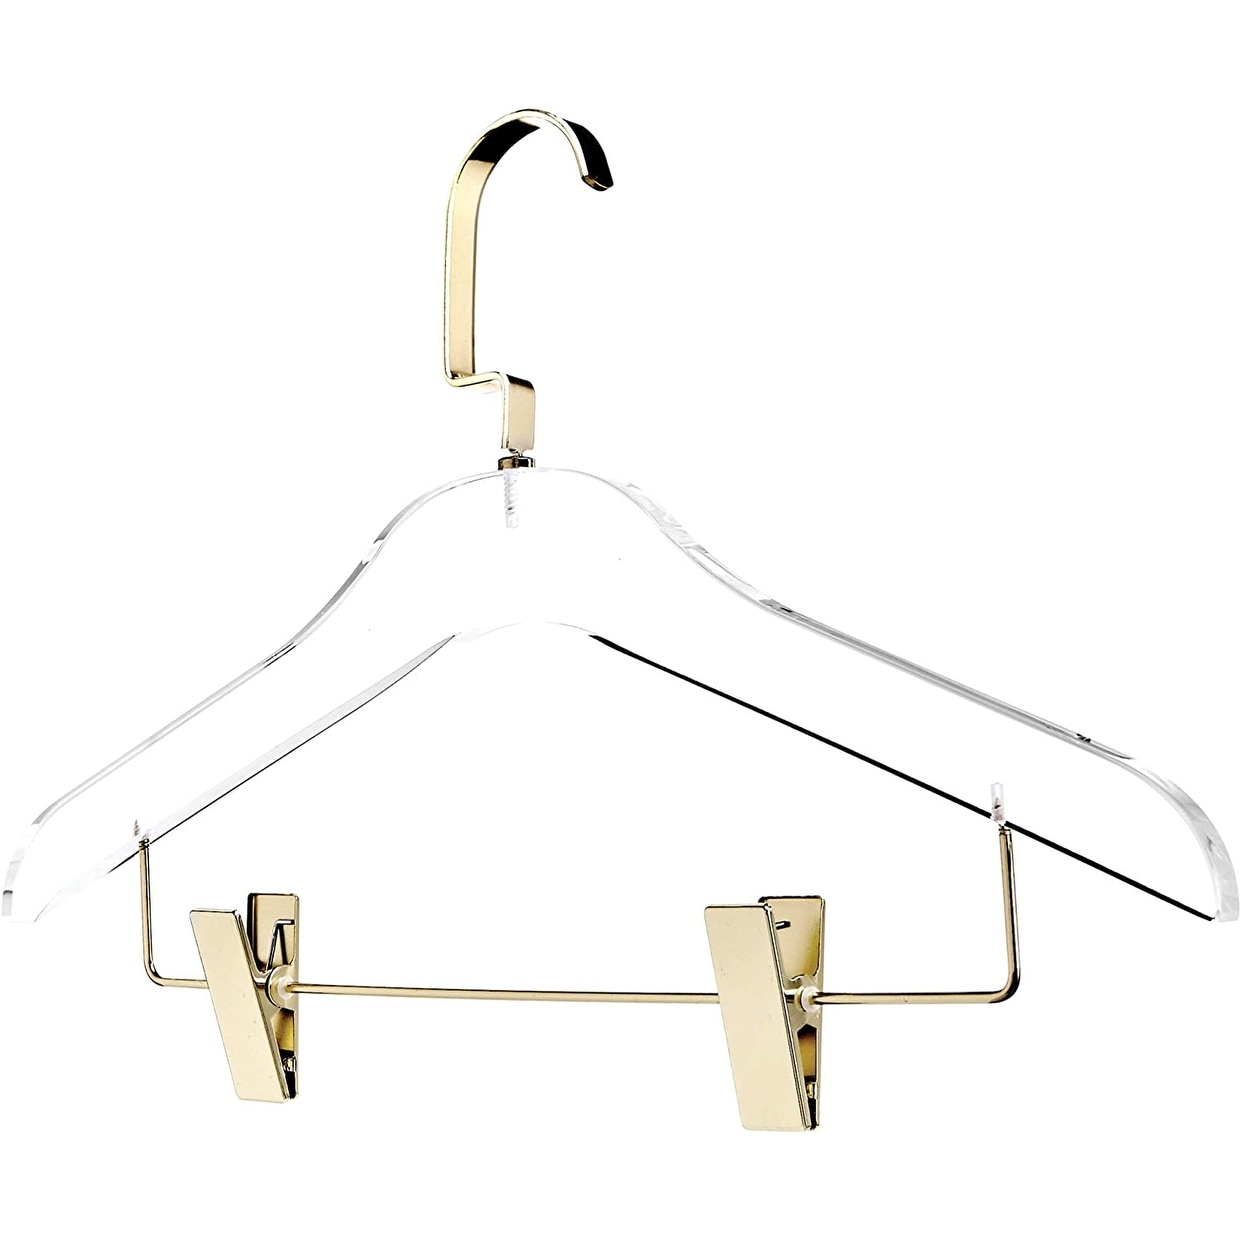 Clear Acrylic Clothes Hangers - 10 Pack Stylish and Heavy Duty Closet  Organizer with Gold Chrome Plated Steel Hooks - Non-Slip Notches for Suit